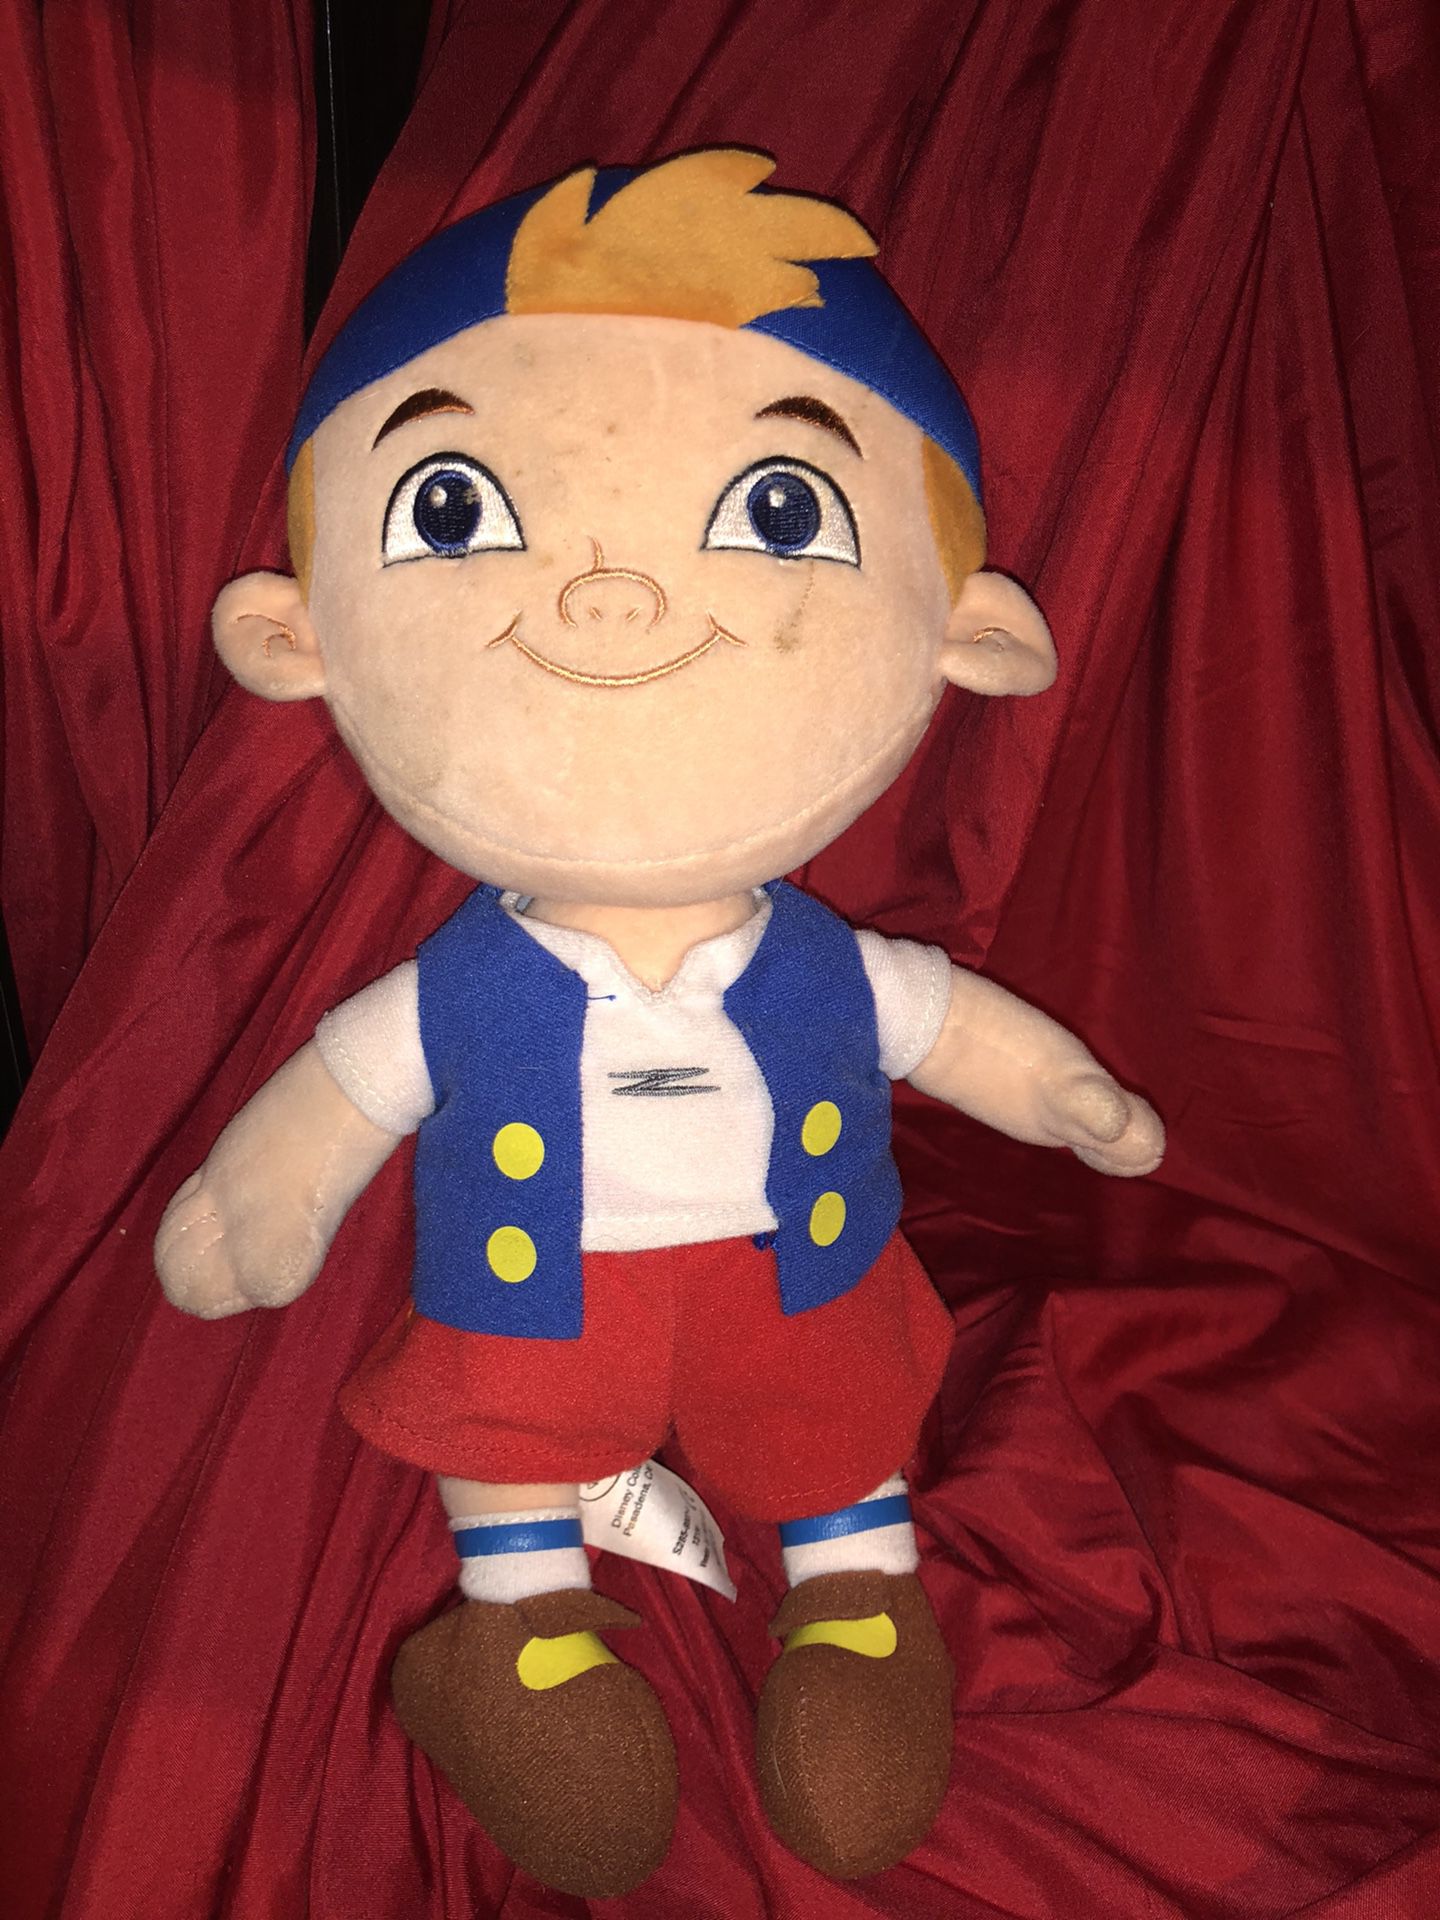 Disney - Cubby plush doll - Jake and the amazing pirates - stuffed animal doll toy 13” tall